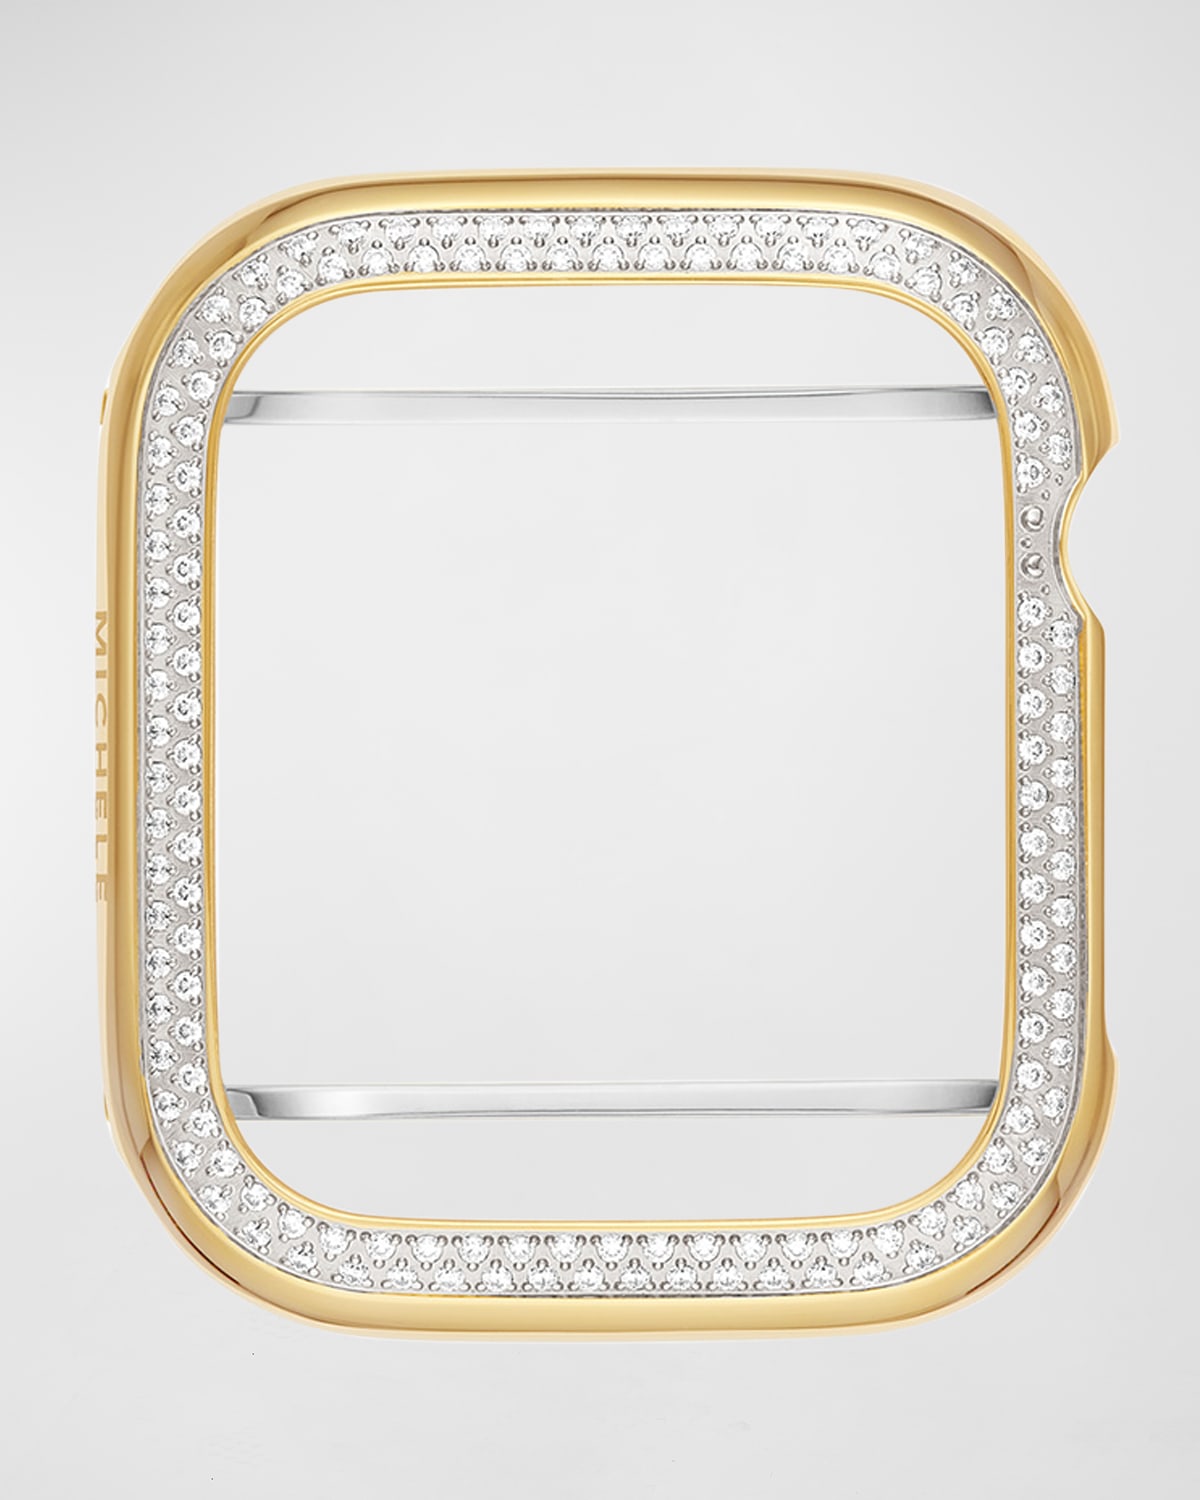 Diamond Jacket for Apple Watch in Two-Tone Gold Plating, 41mm